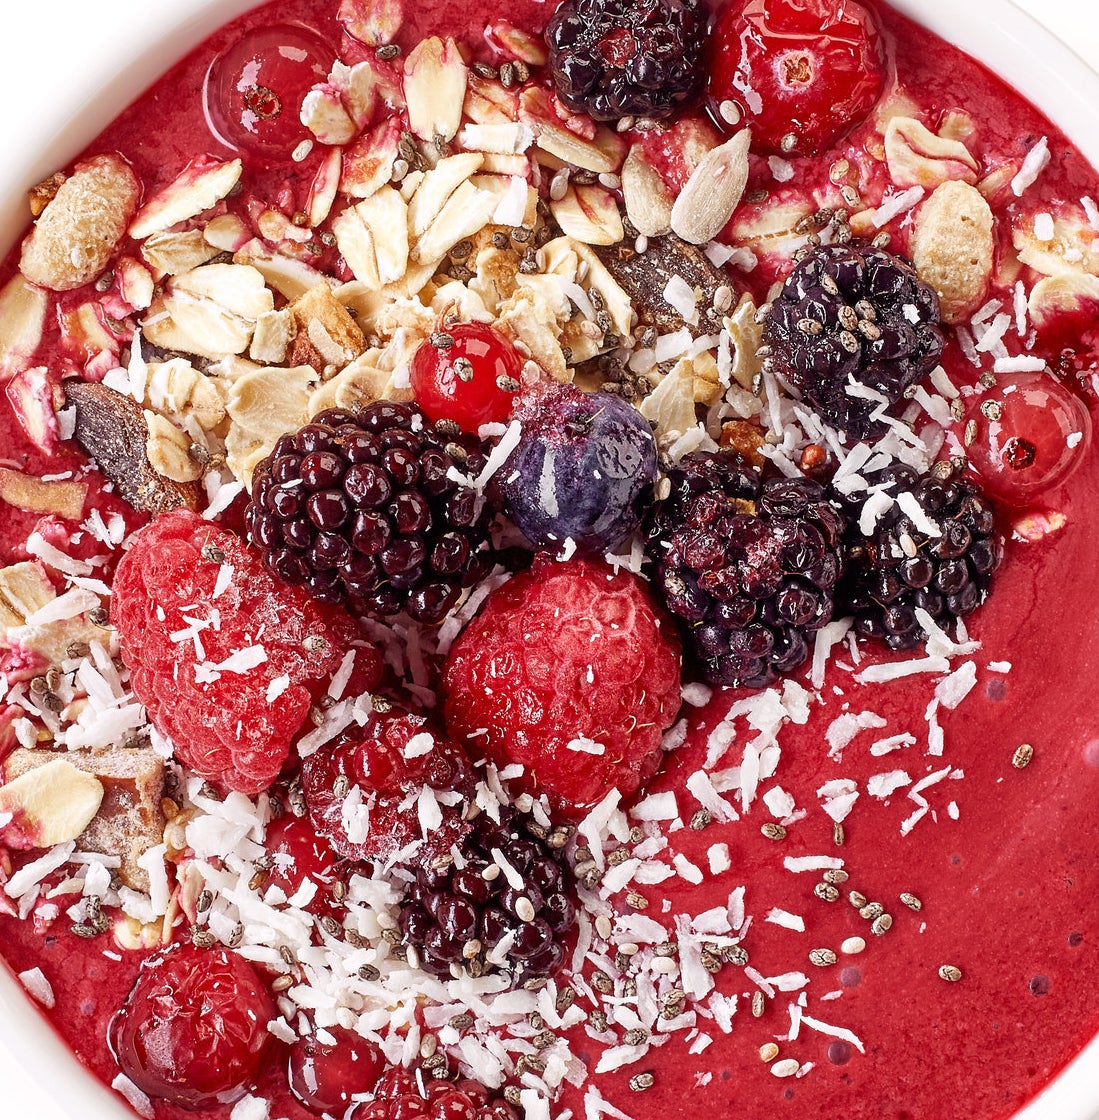 A smoothie bowl with berries and coconut flakes